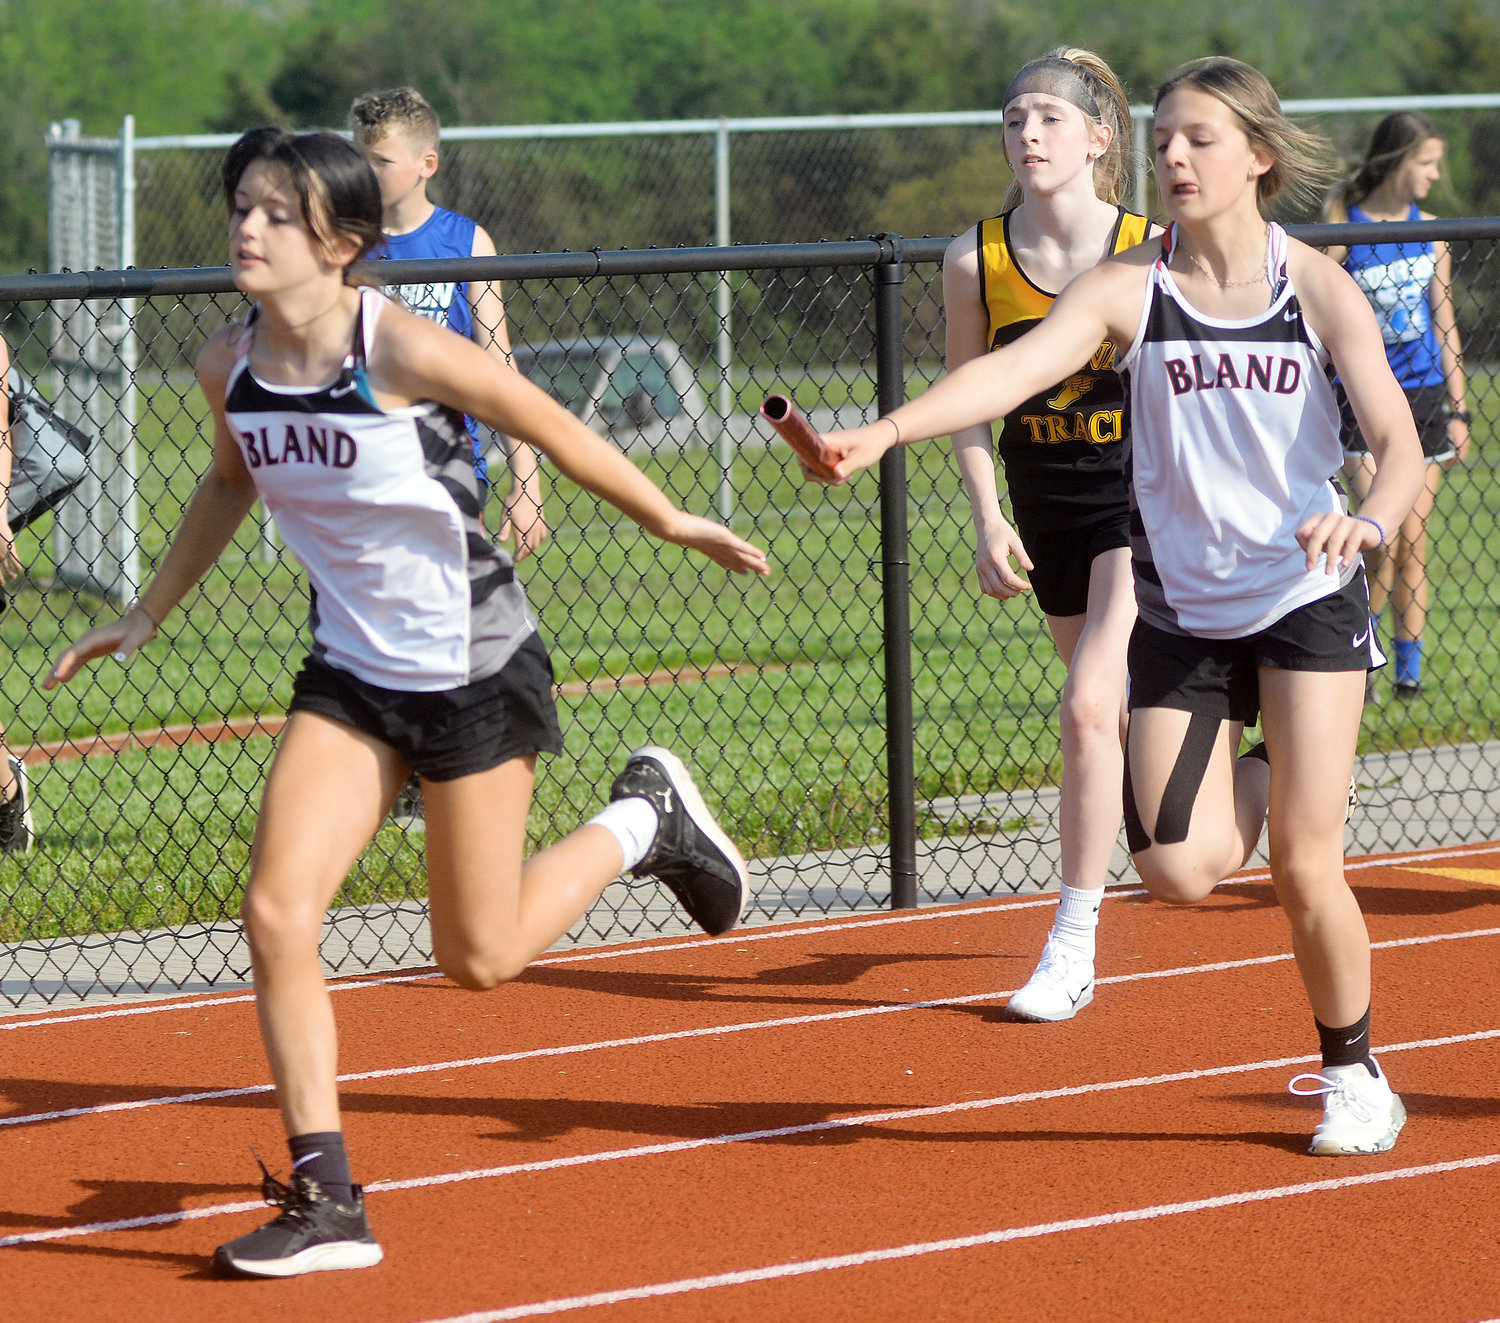 Nolie Finnegan (far left) reaches back for the baton from Anastyn Lansford for Bland’s Lady Bears during the girls 4x200-meter relay.